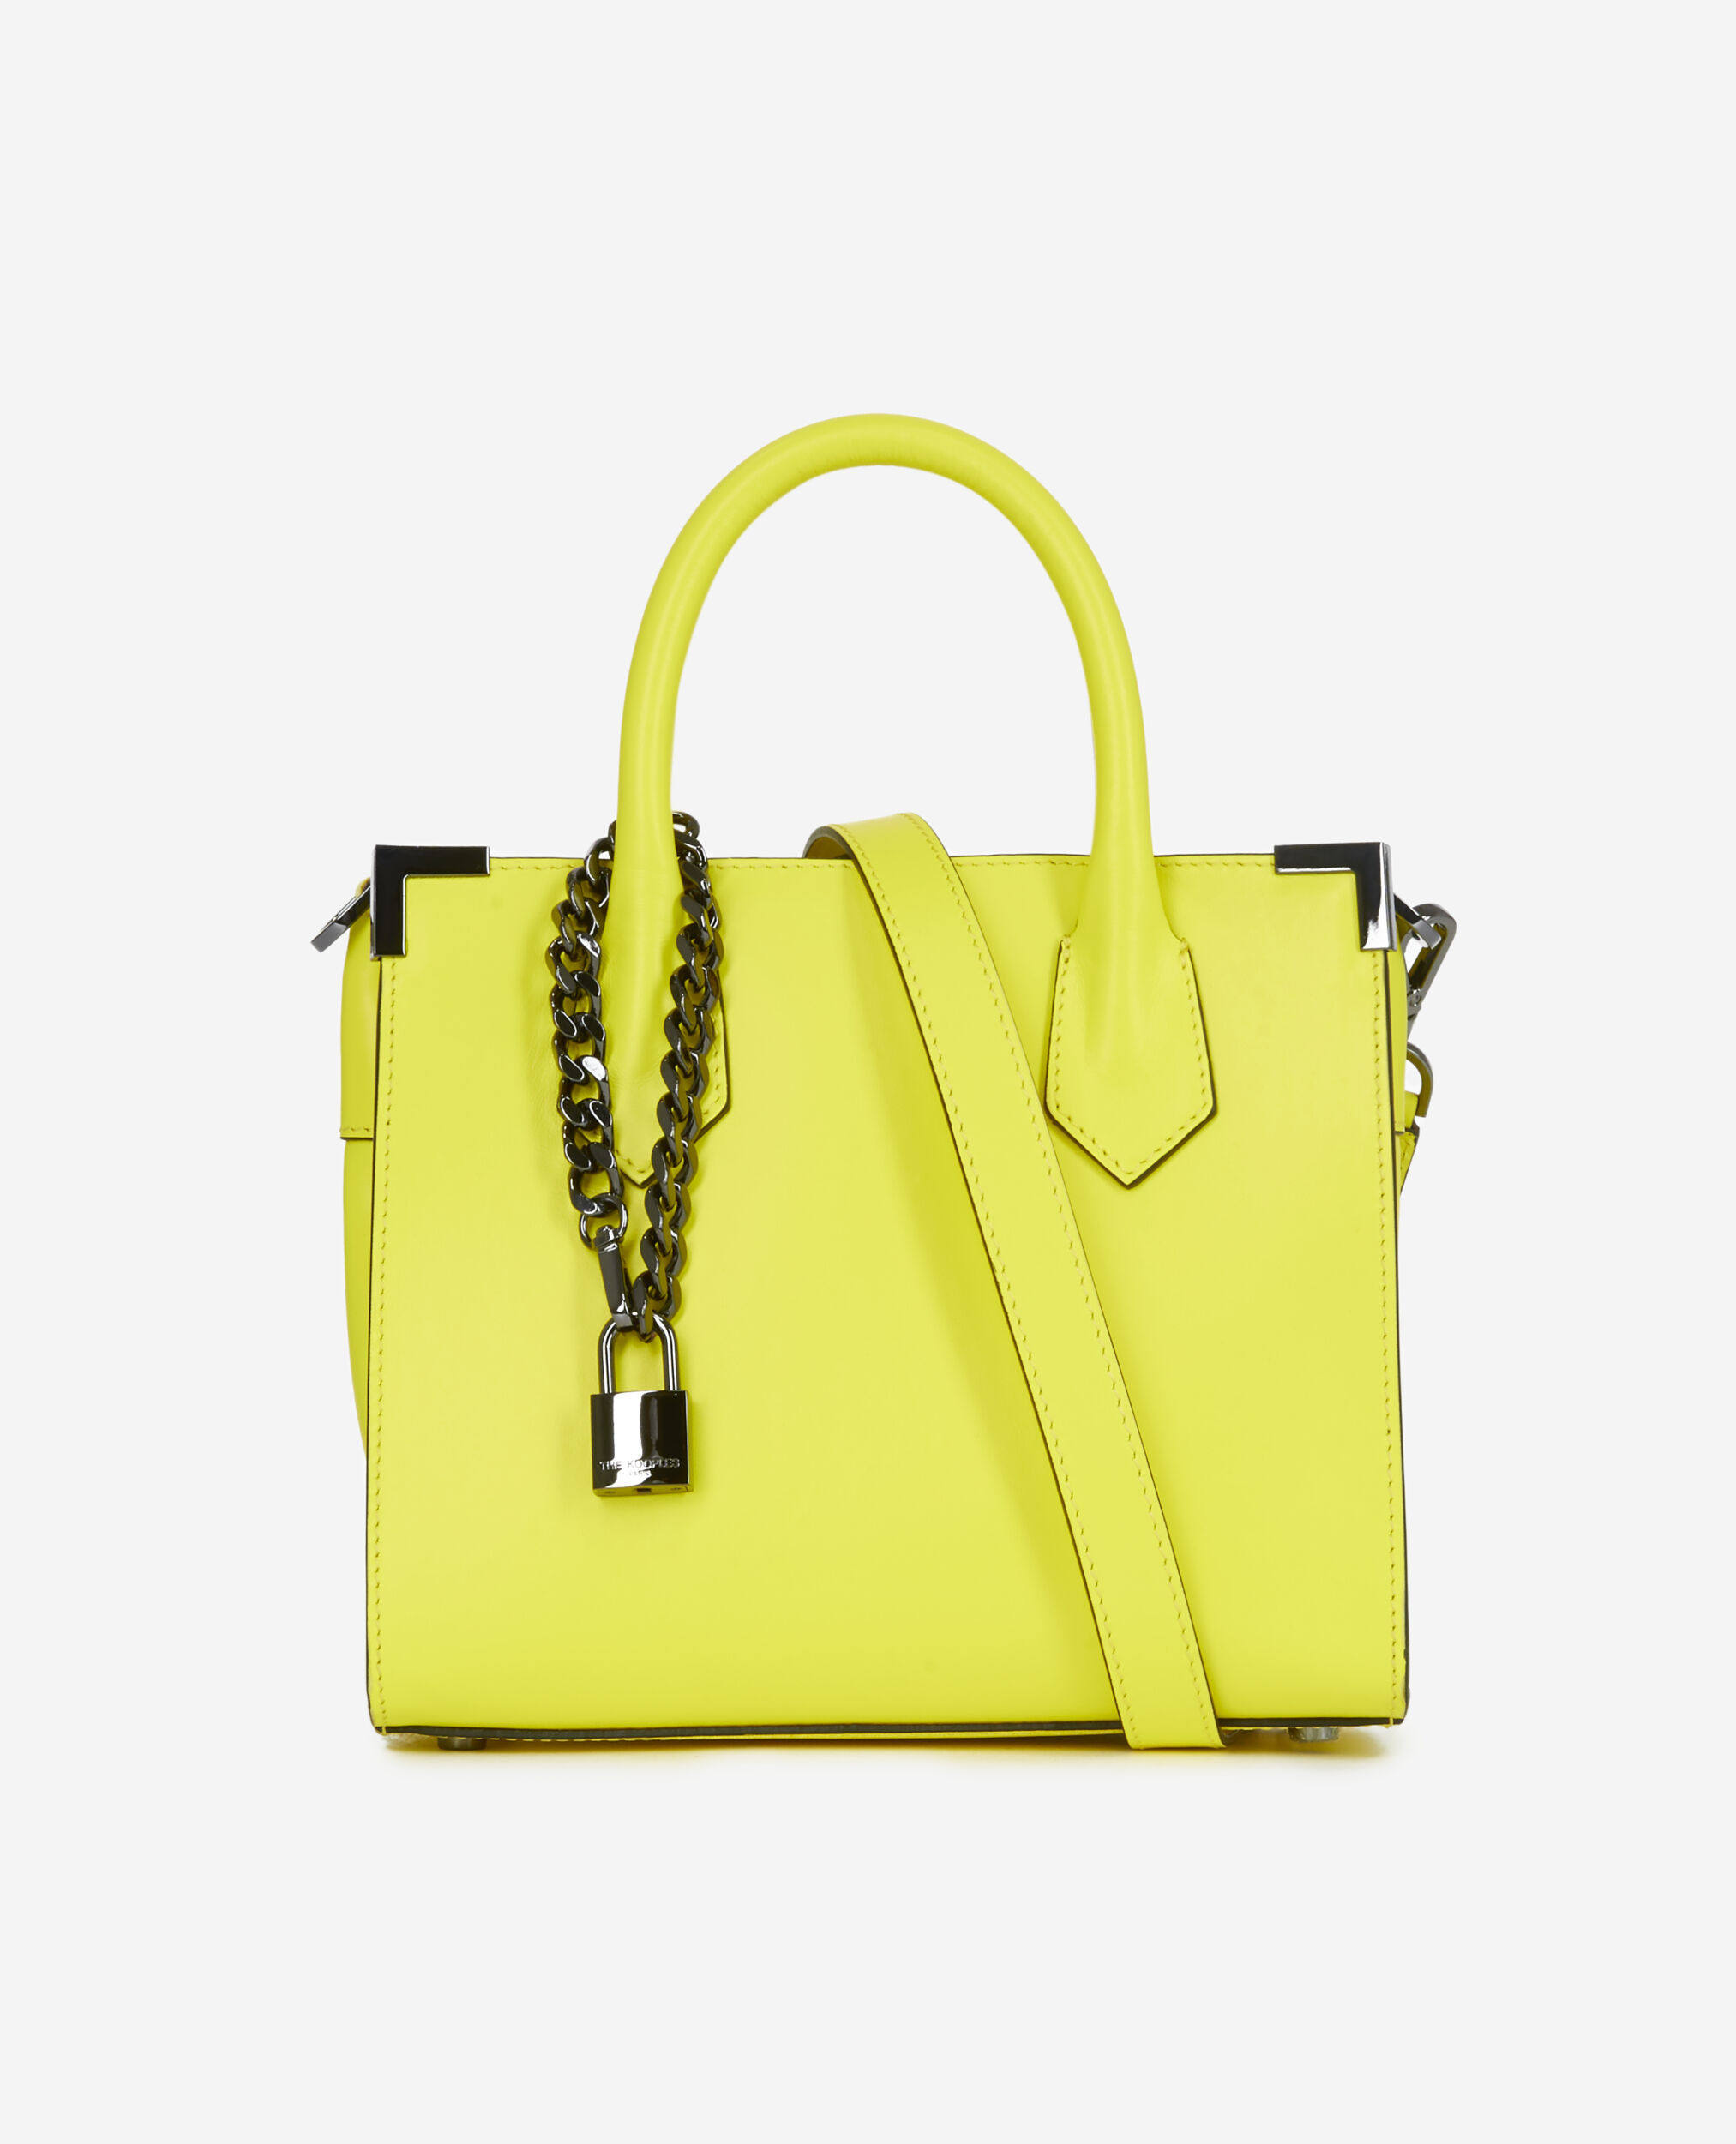 Medium Ming bag in yellow leather, YELLOW ACID, hi-res image number null